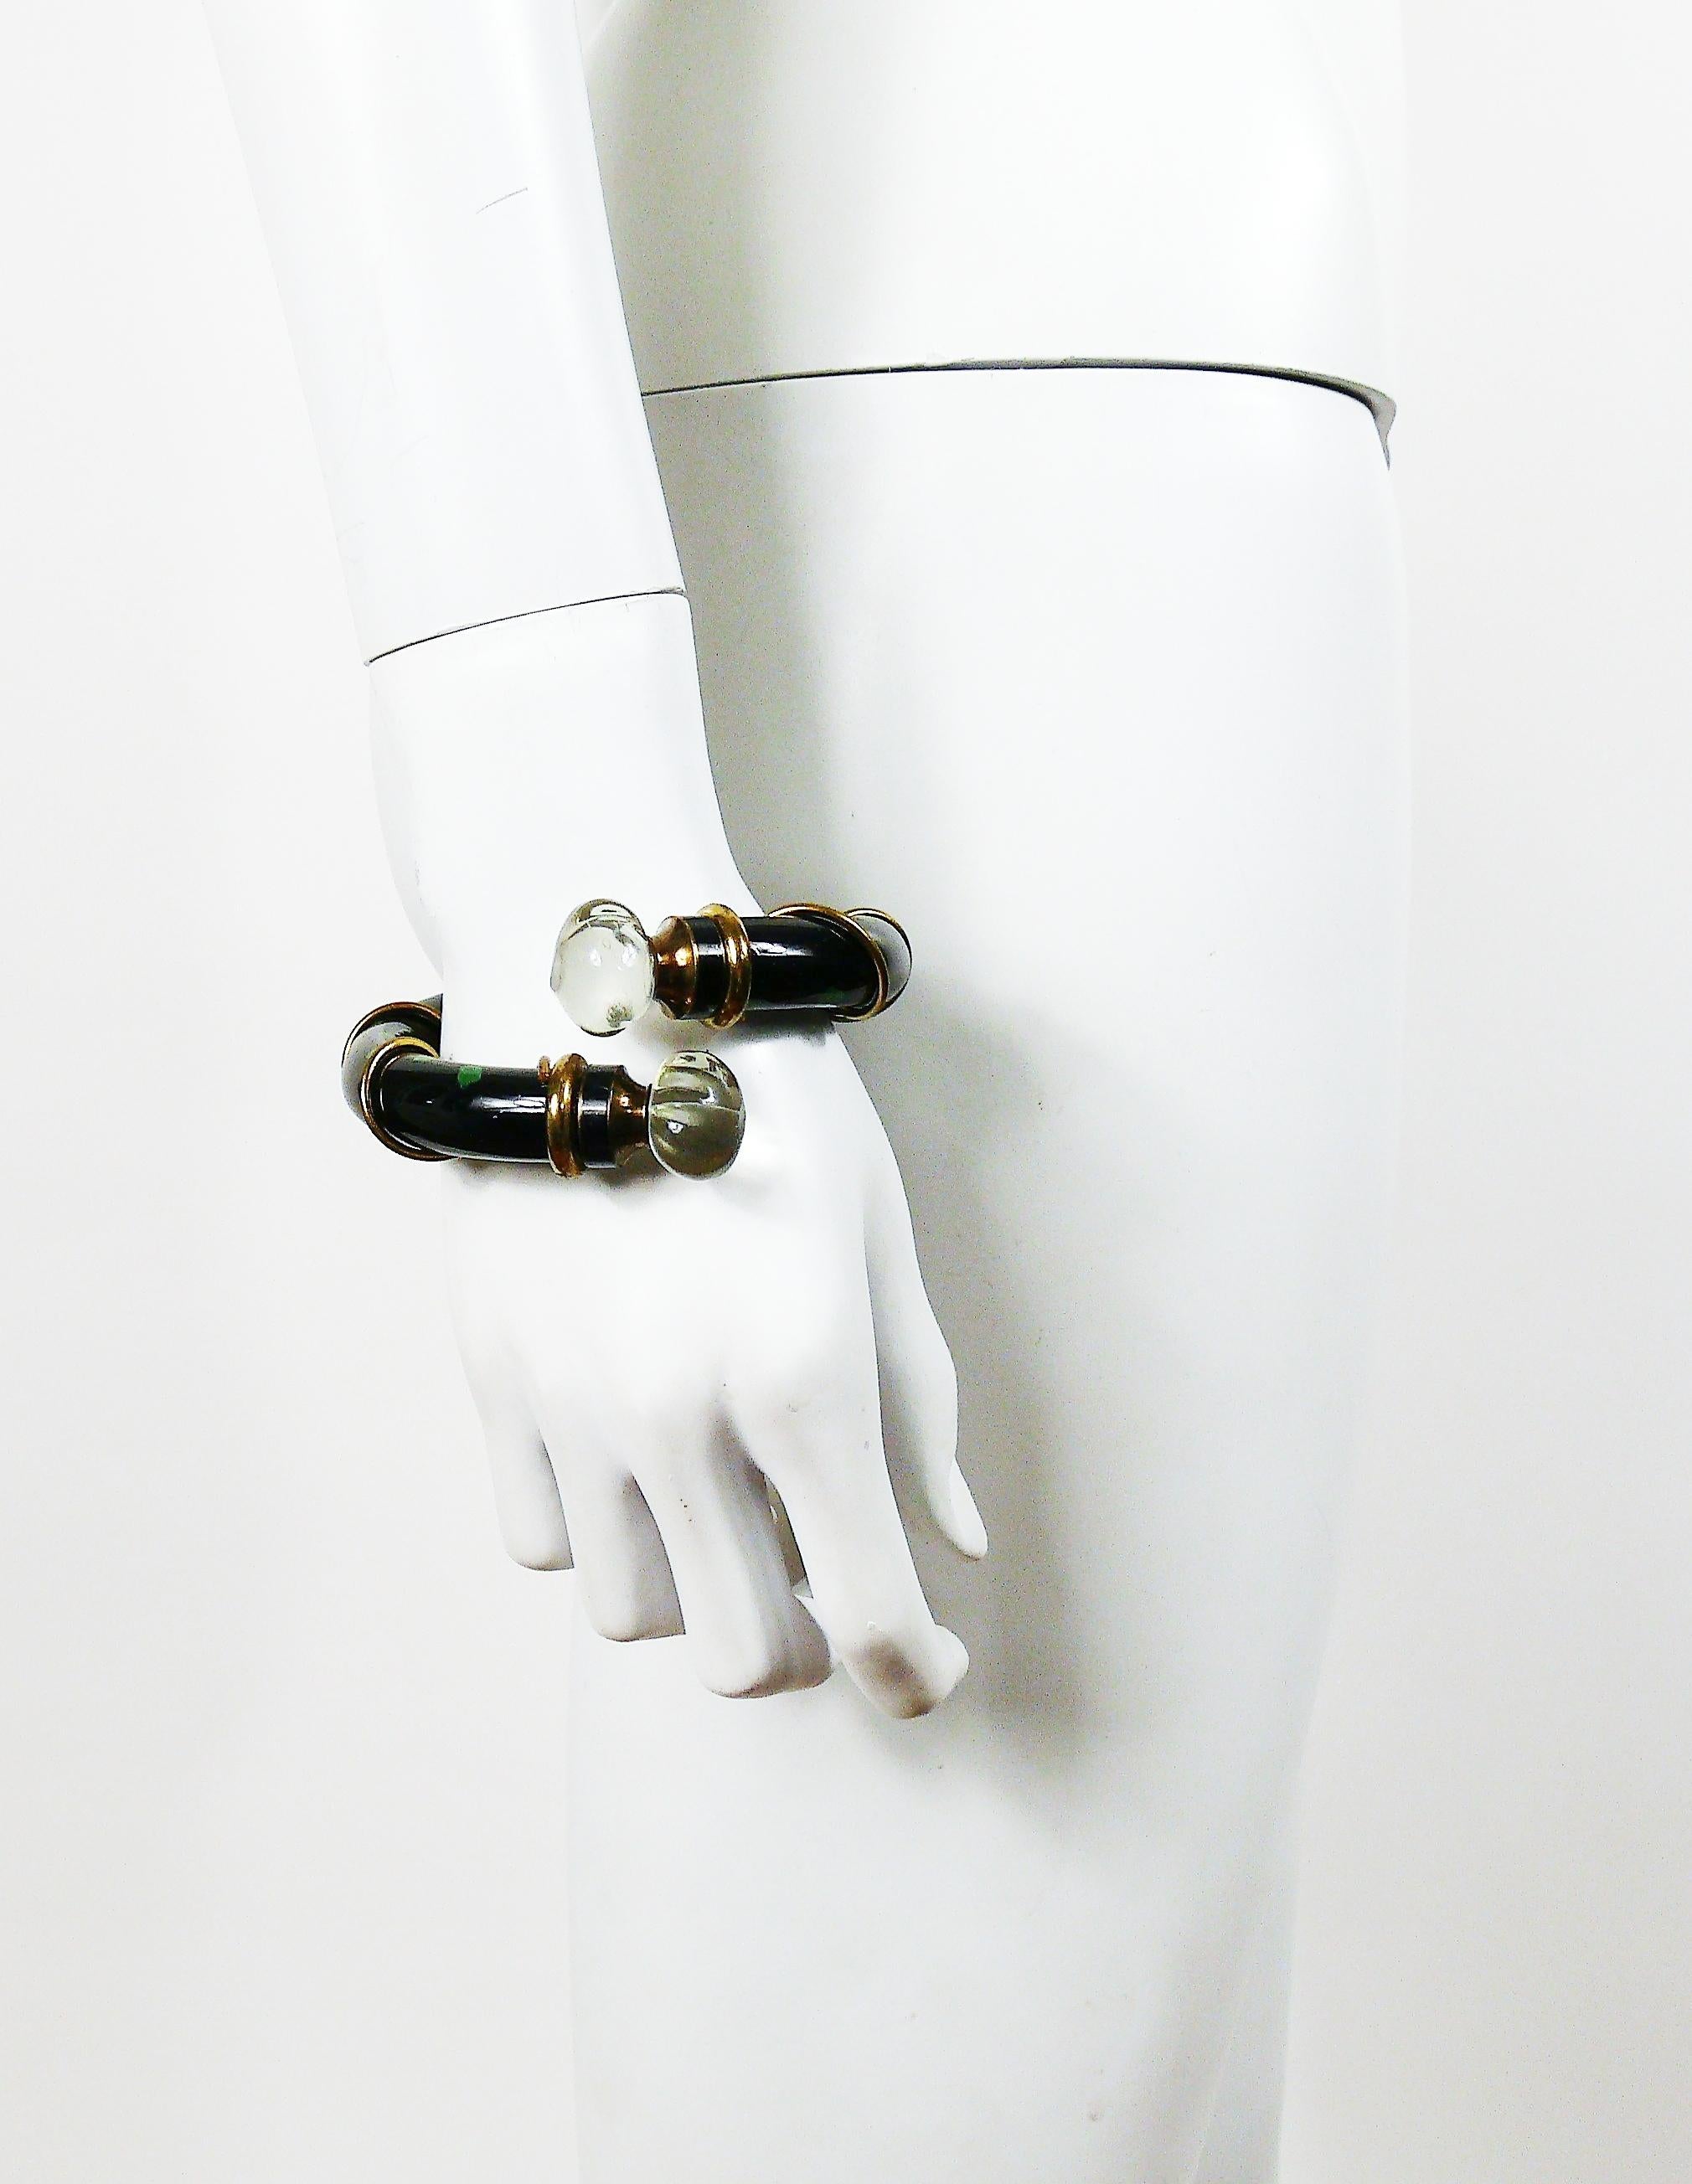 CHRISTIAN DIOR Parfums vintage POISON bracelet.

This bracelet features :
- Tubular structure in black with green spots.
- Gold toned wired hardware.
- Clear resin taps (DO NOT unscrew).

Marked POISON CHRISTIAN DIOR Paris.

Indicative measurements